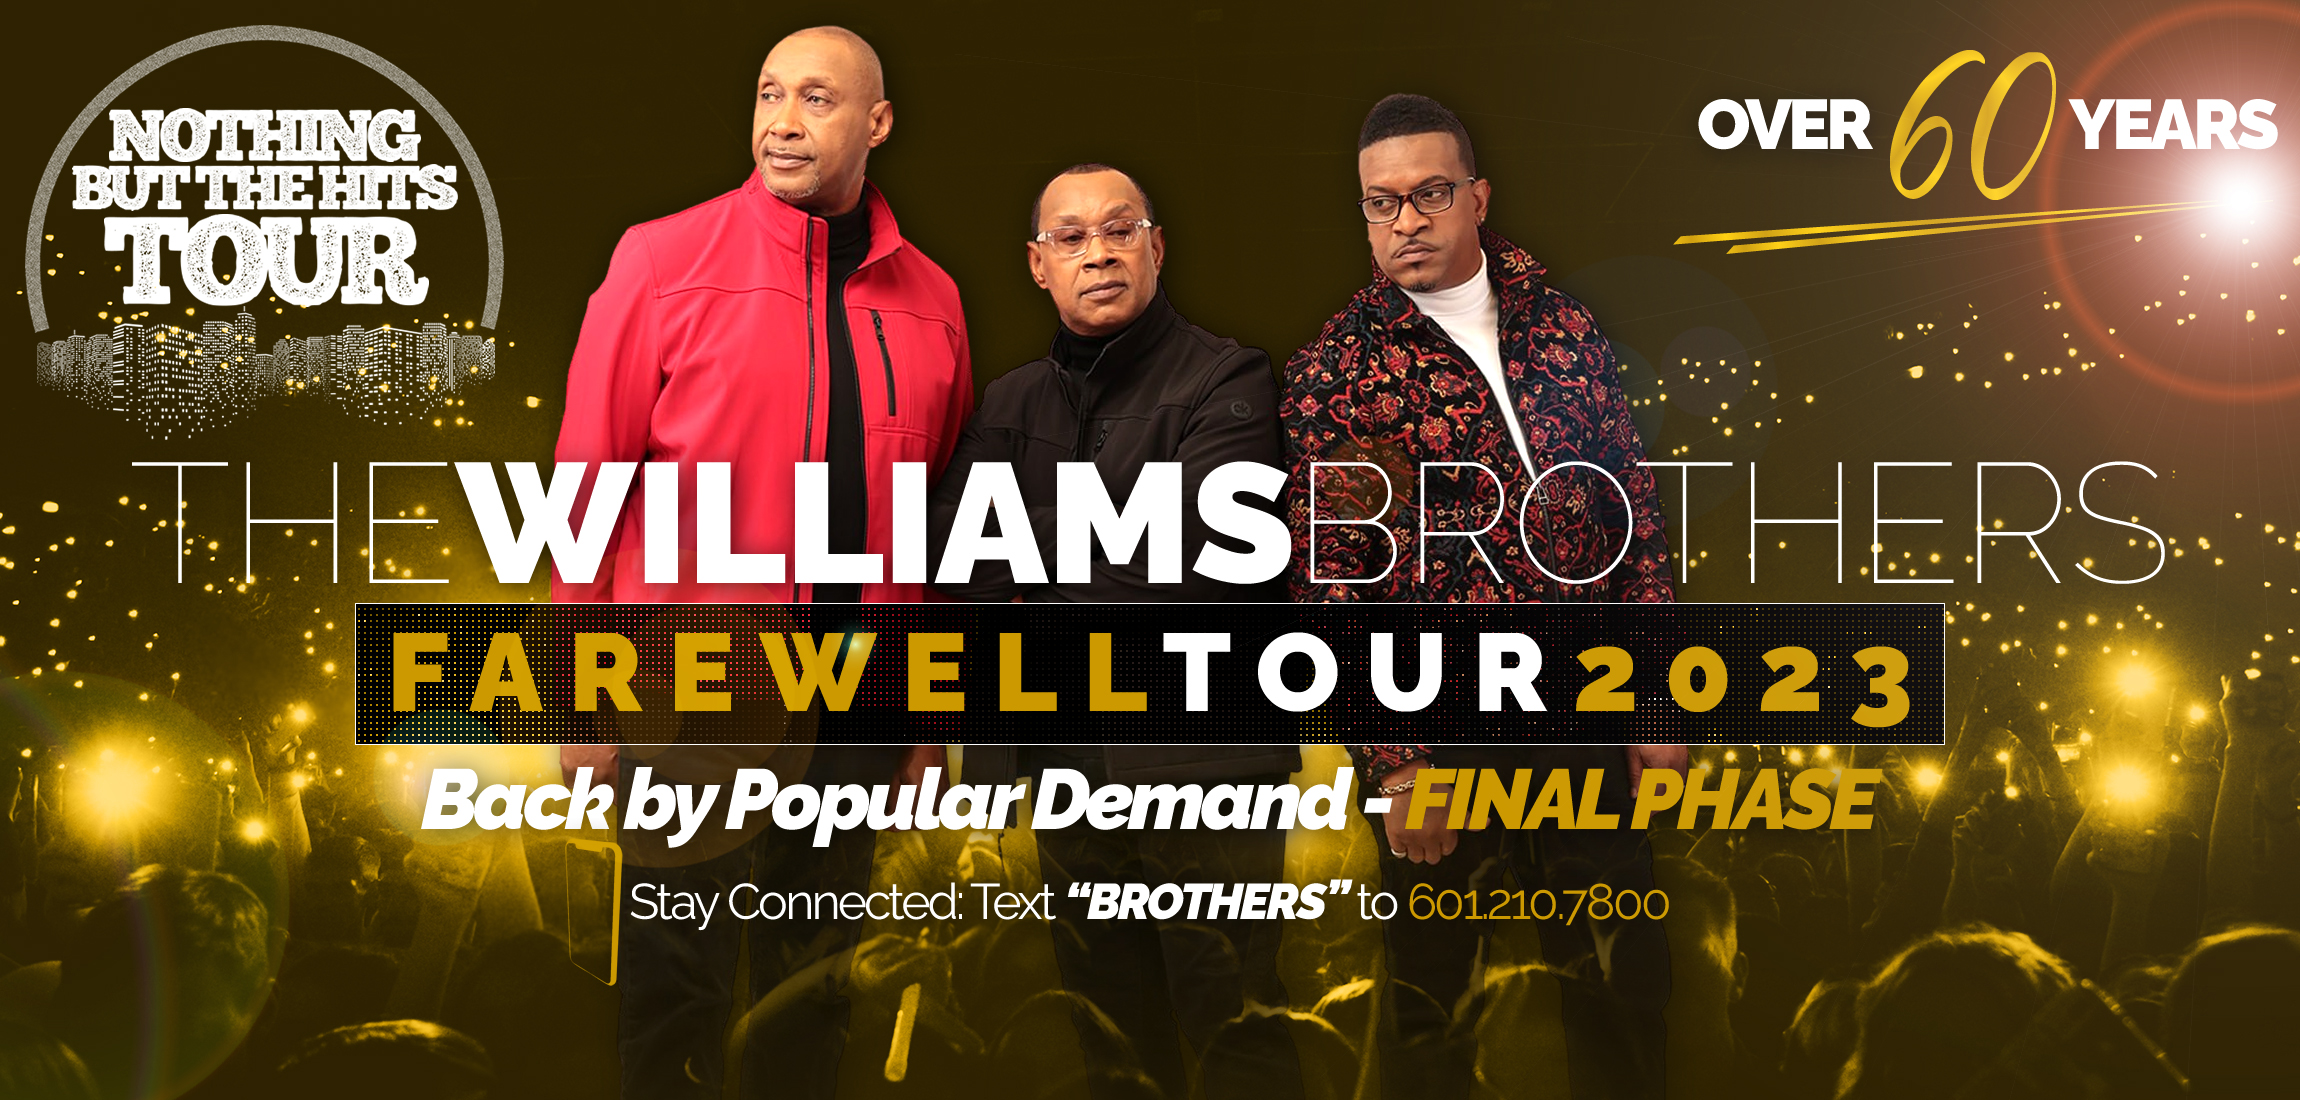 The Williams Brothers Farewell Tour